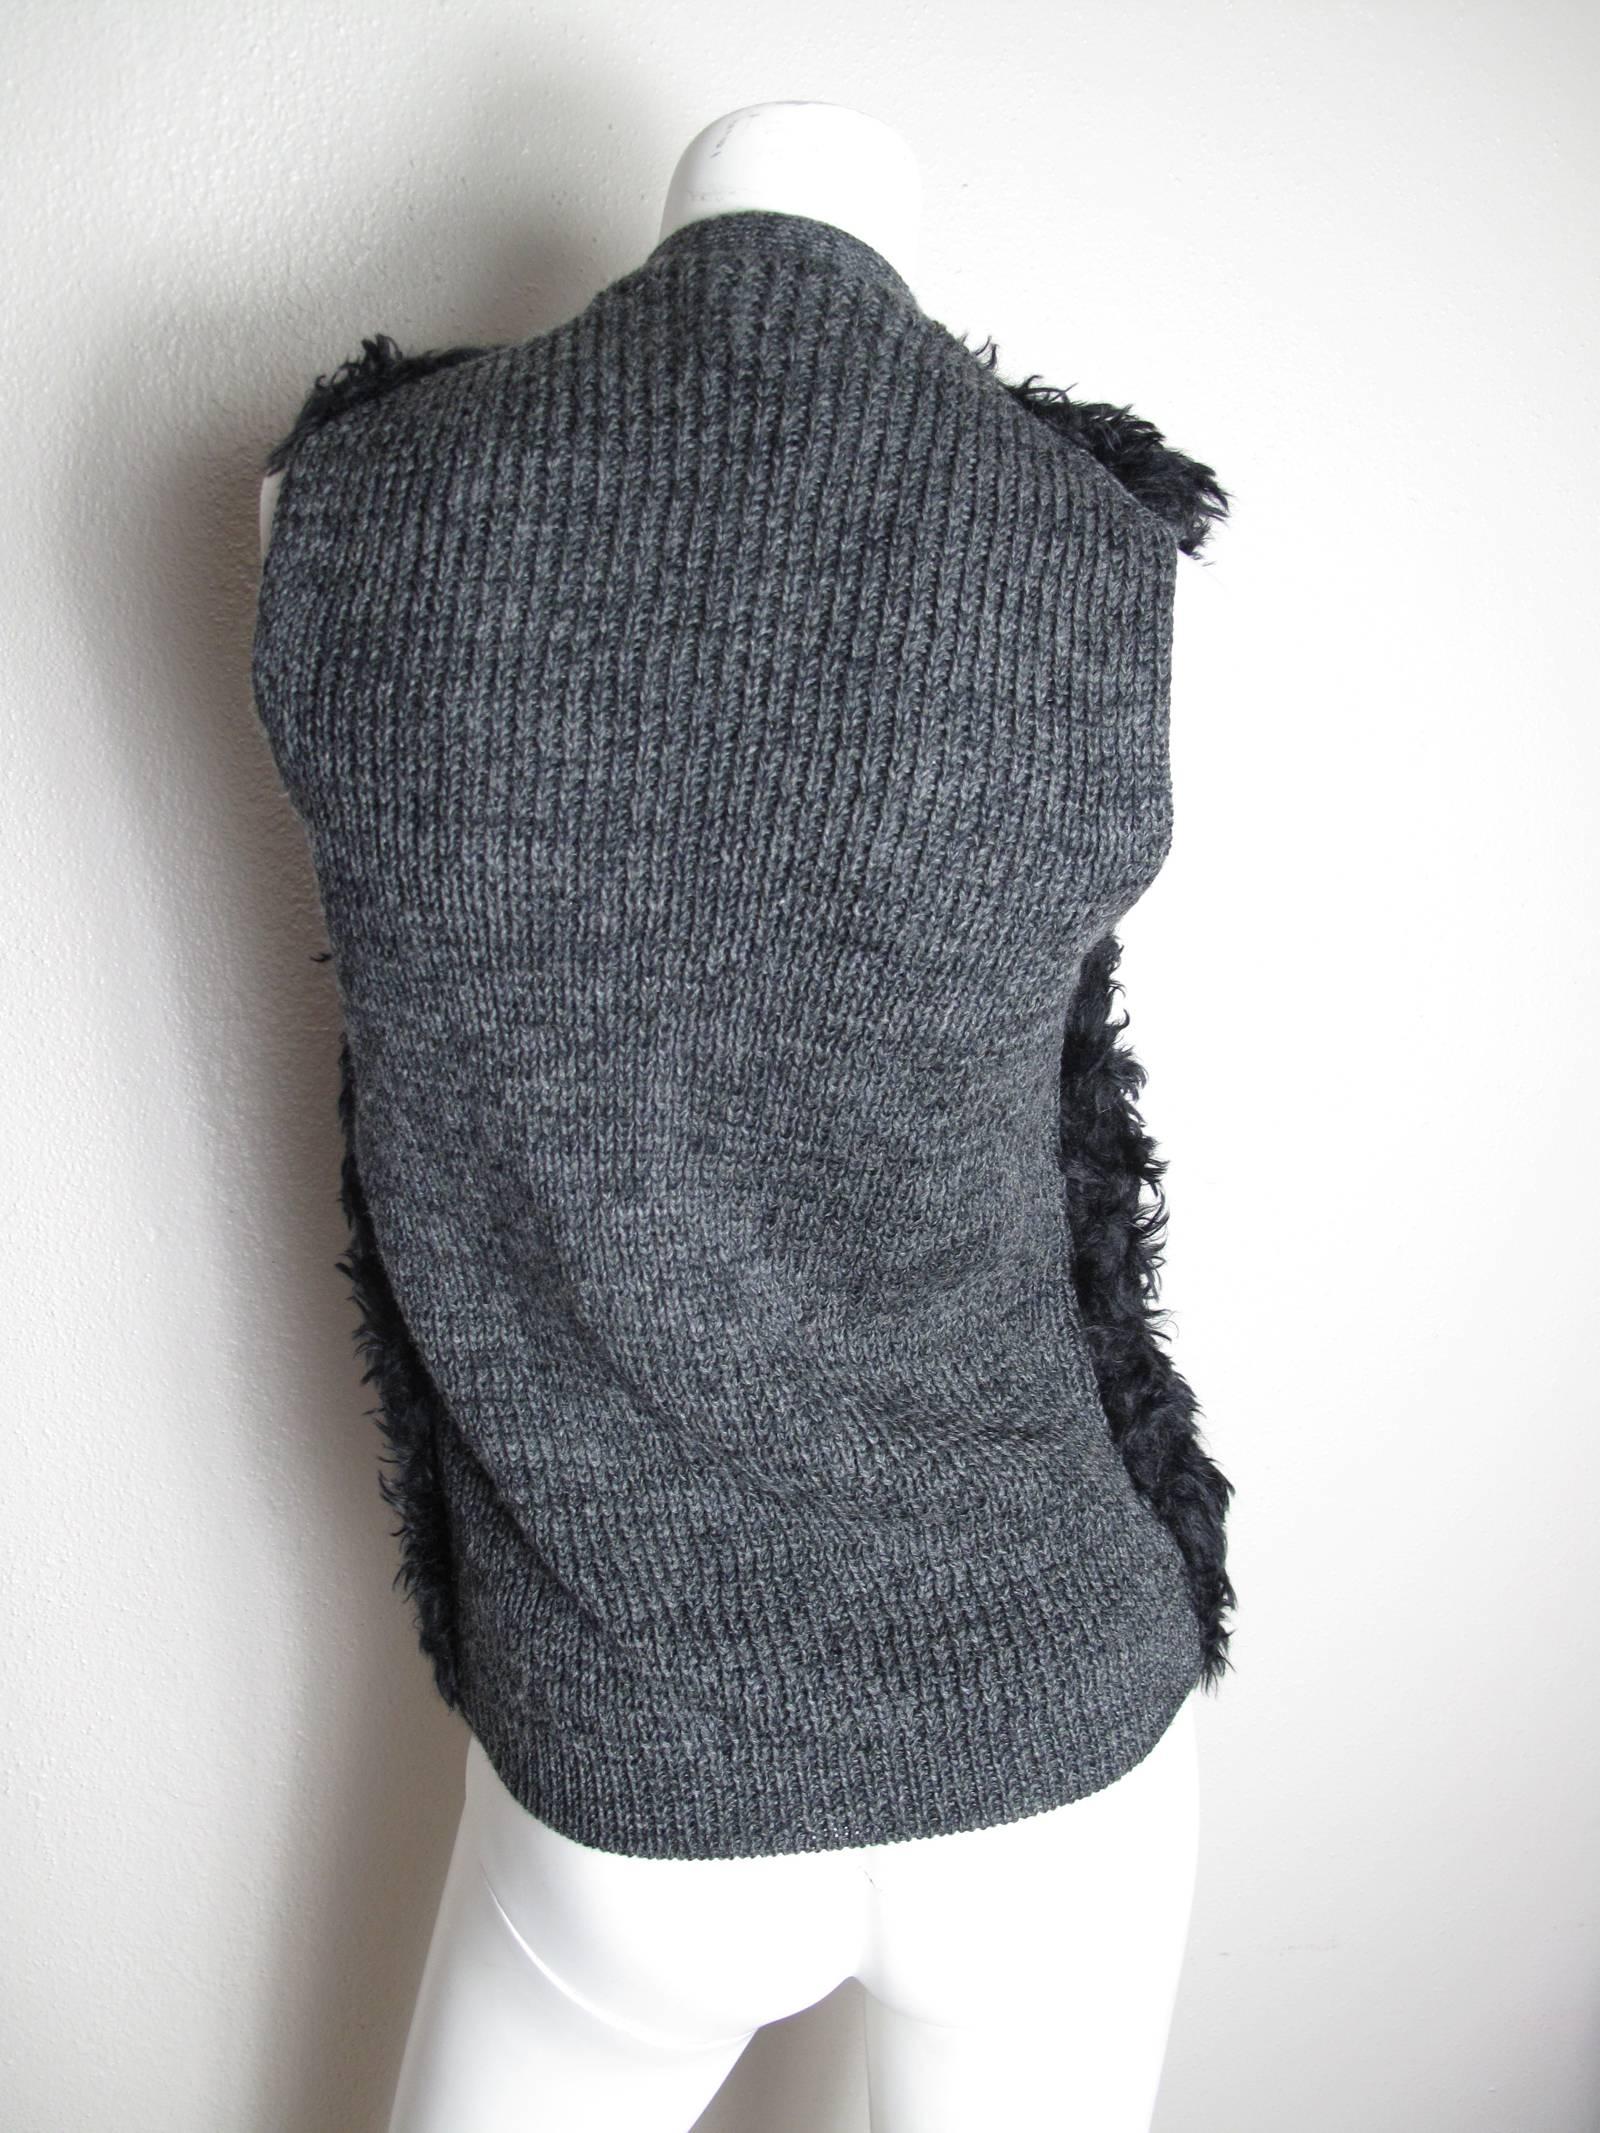 Prada grey knit wool sweater vest with black wool fake fur.  Condition: Excellent. Size Medium
(mannequin is a US size 6 )

We accept returns for refund, please see our terms.  We offer free ground shipping within the US.